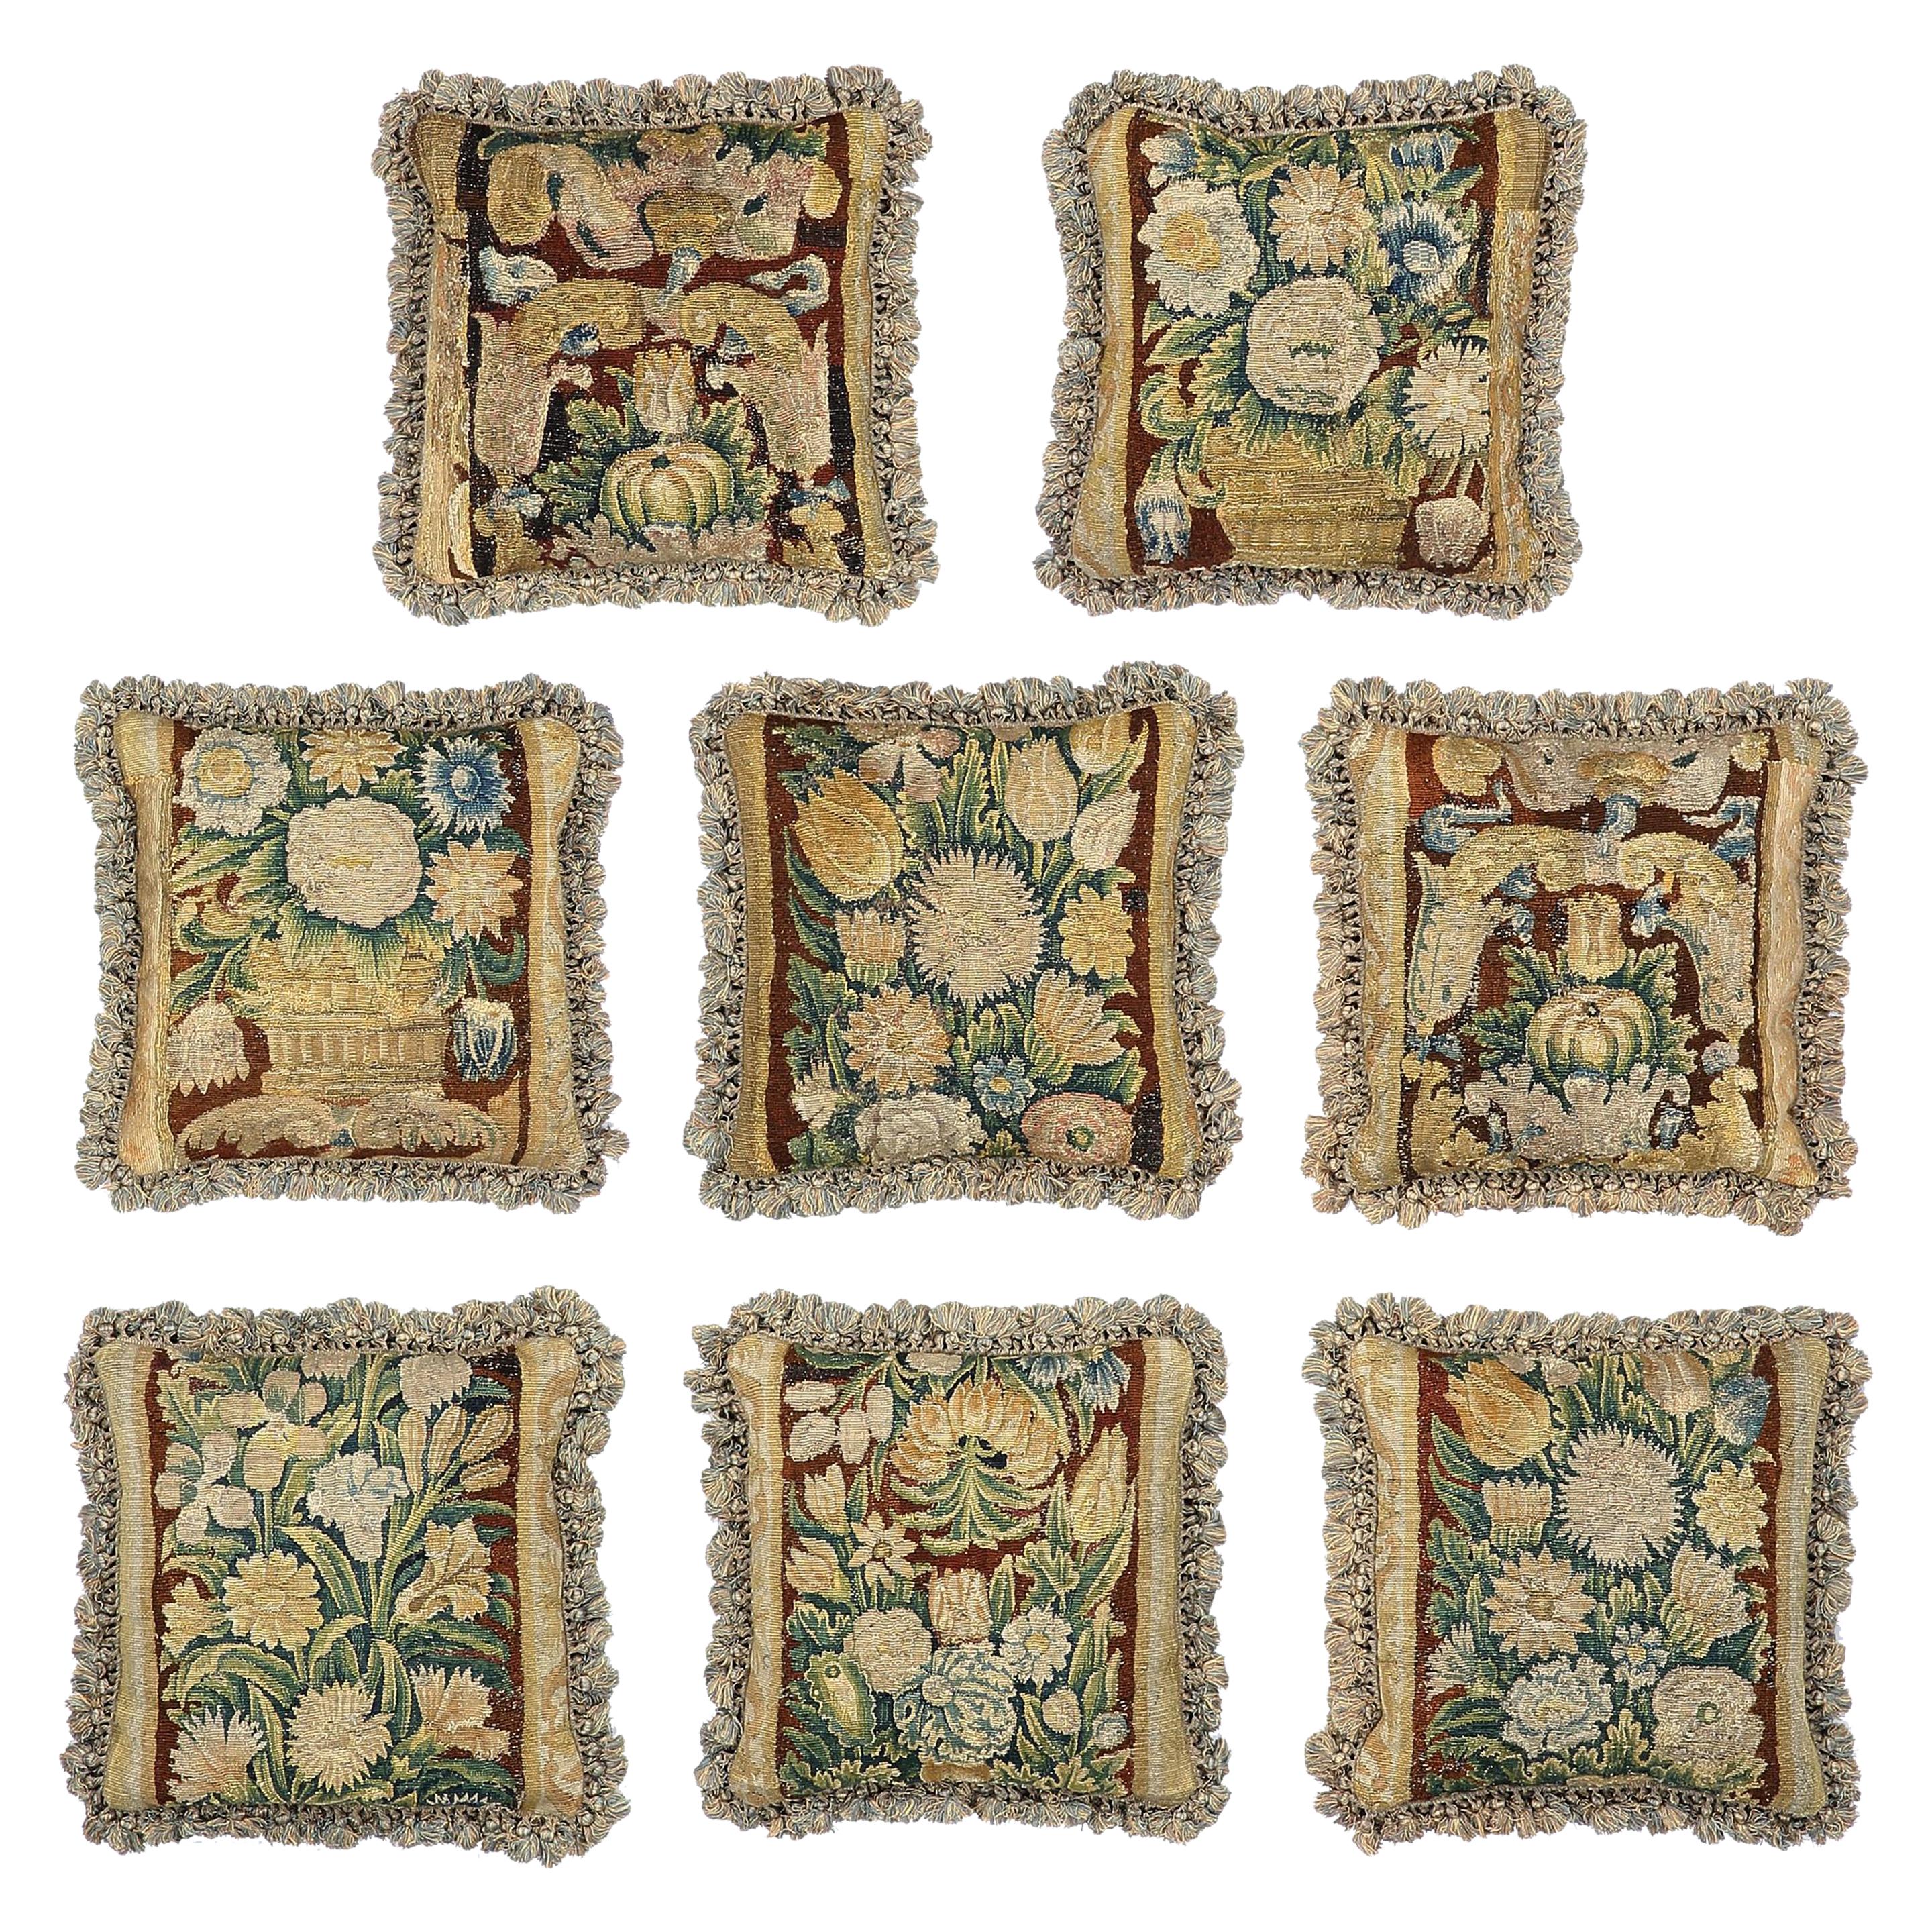 Set of Eight Tapestry Pillows Cushions Mid-17th Century Flemish Baroque Verdure